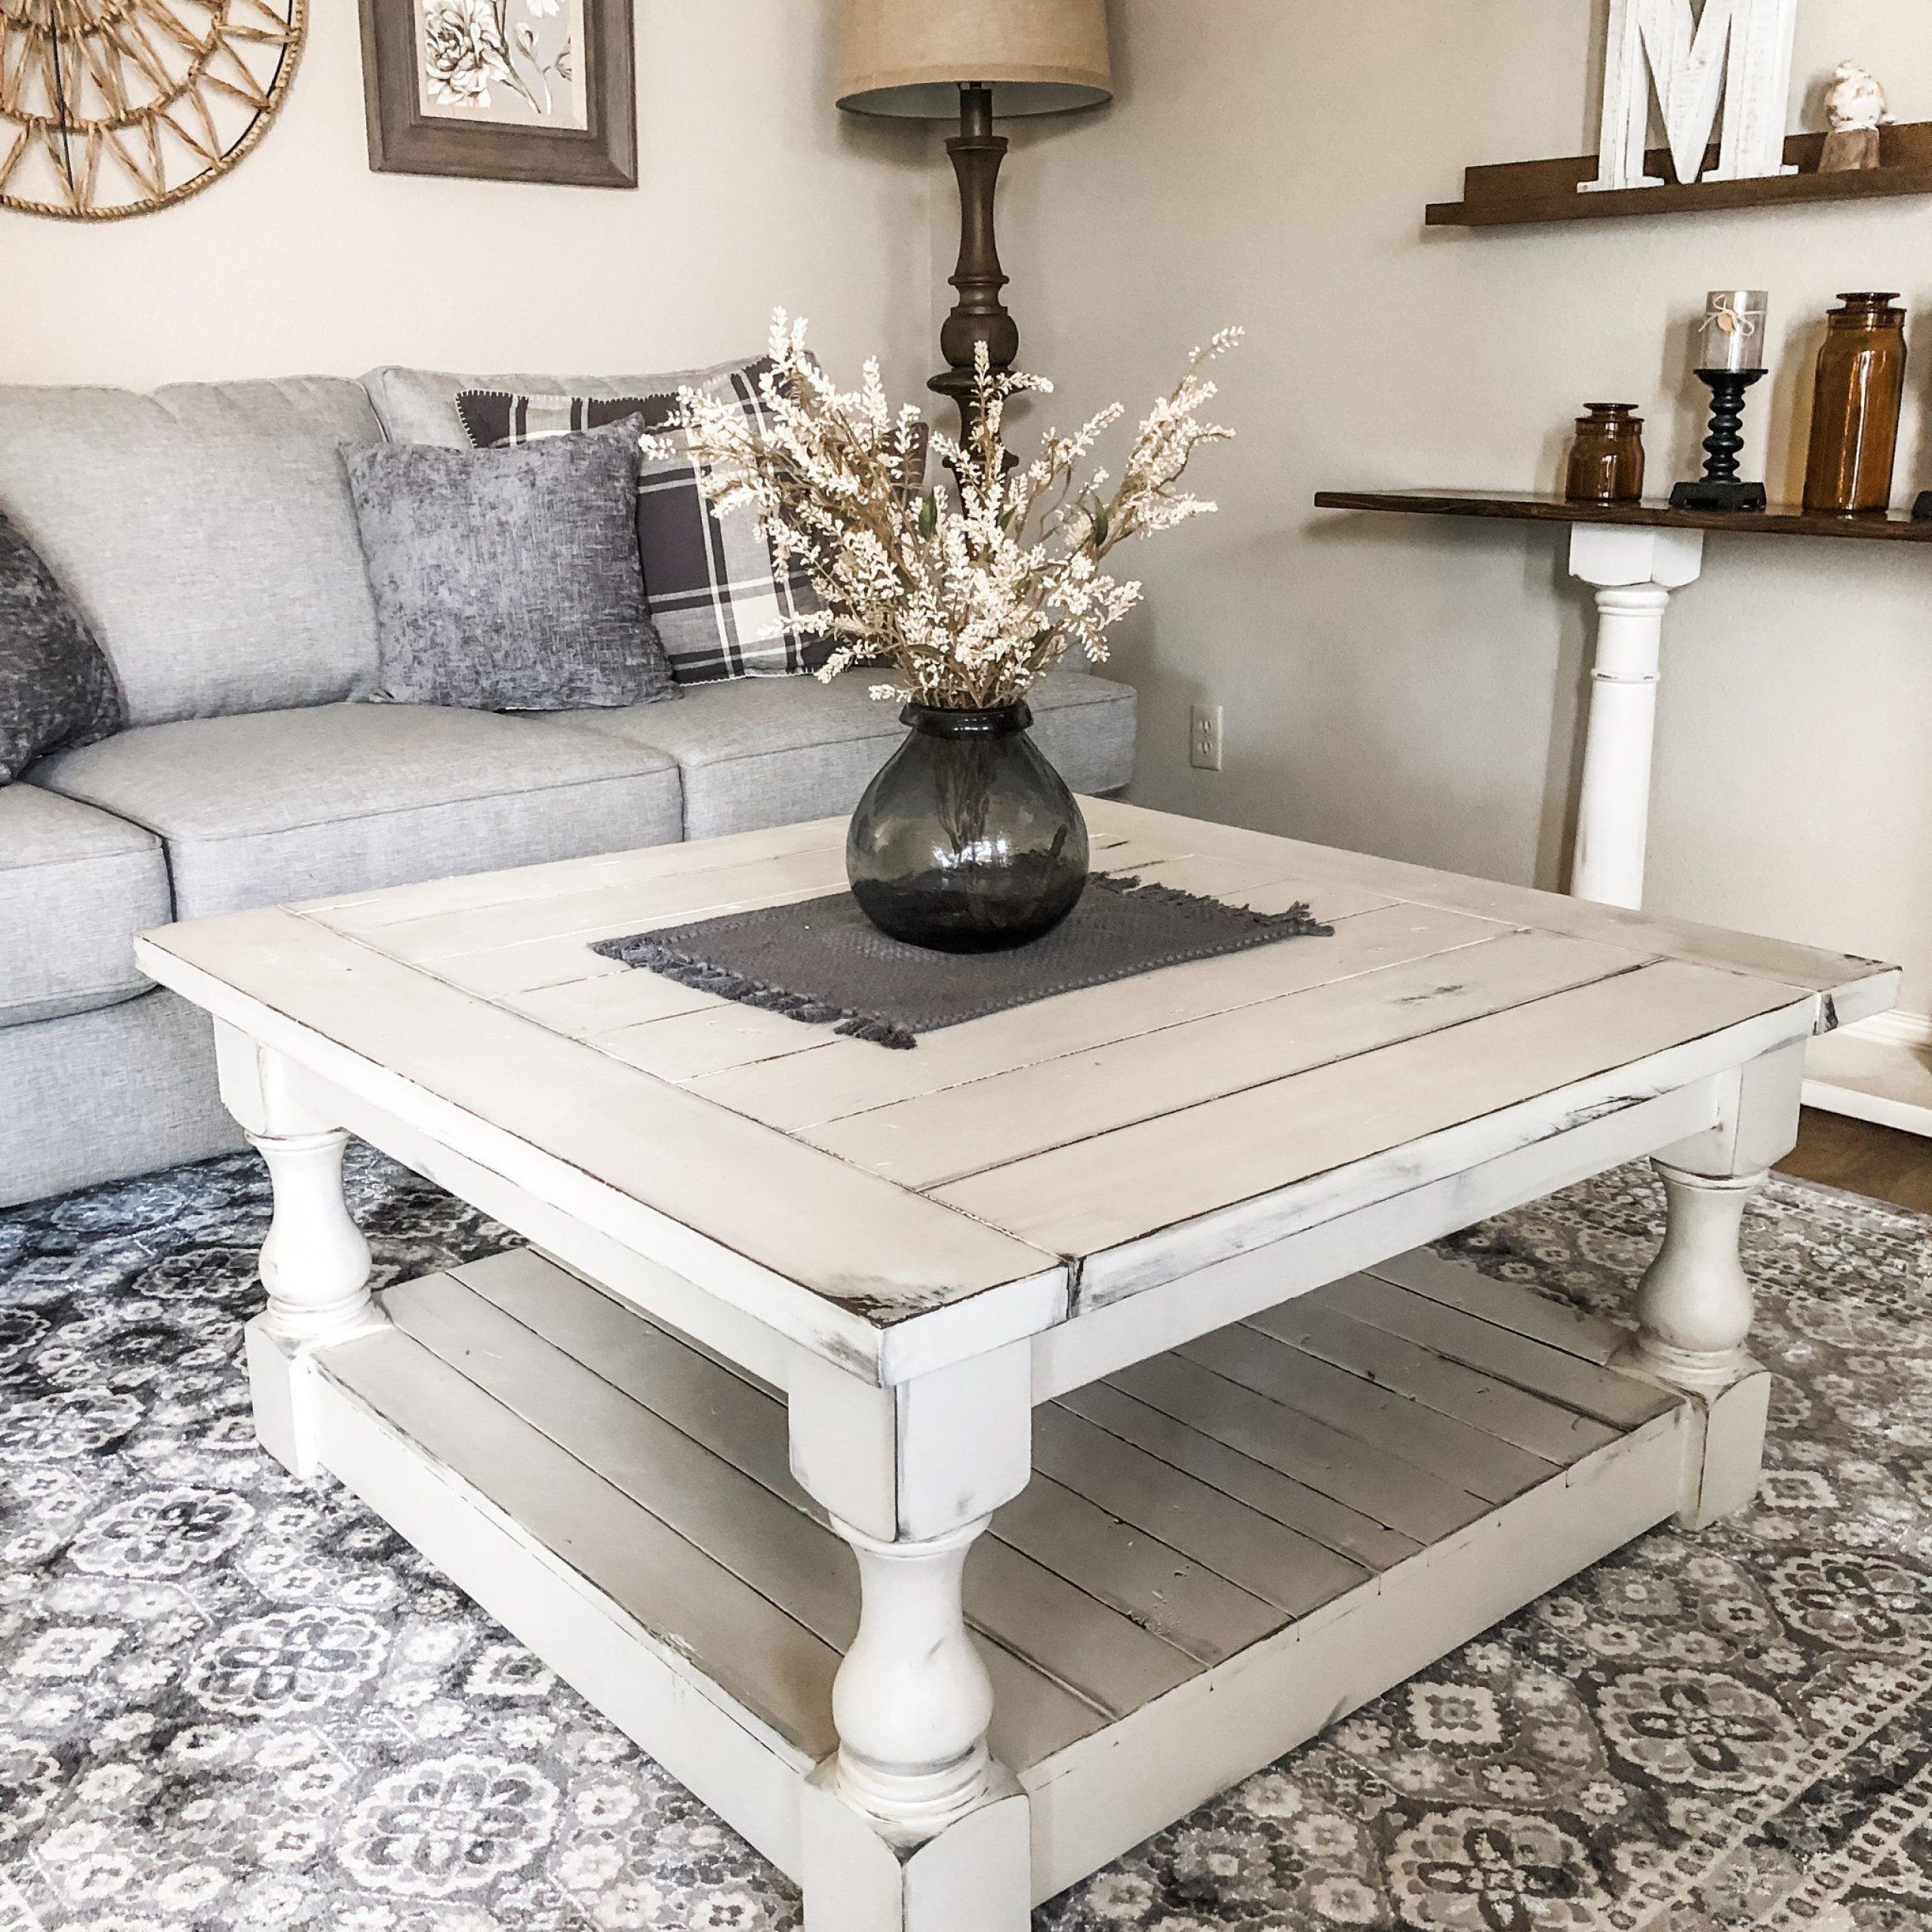 Rustic Baluster Square Farmhouse Coffee Table All Painted & Distressed Throughout Living Room Farmhouse Coffee Tables (Gallery 14 of 20)